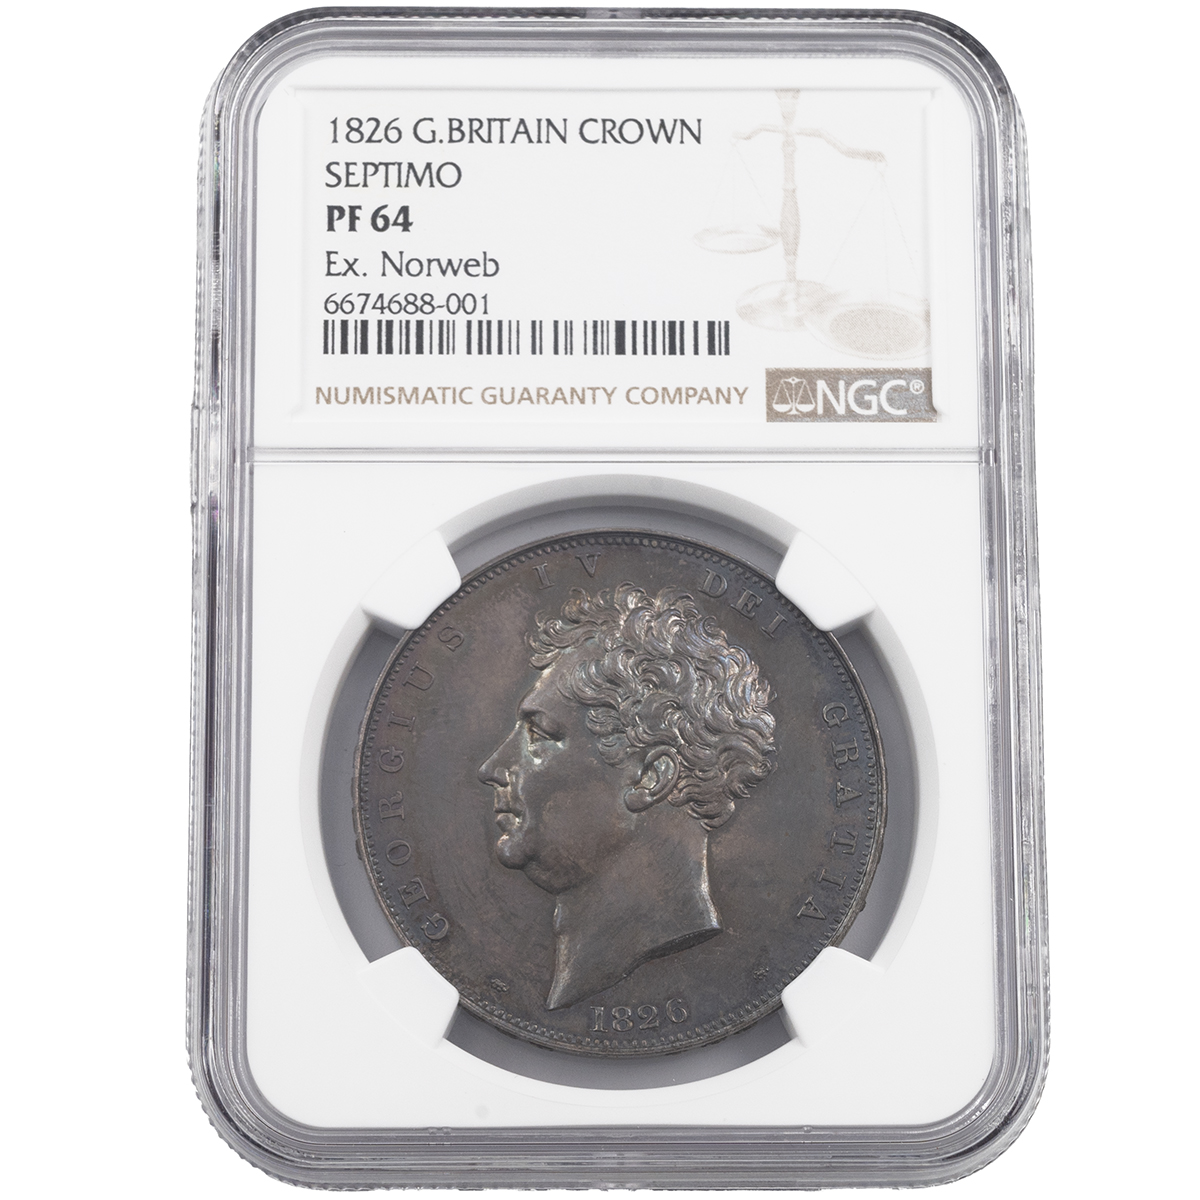 1826 proof Crown of King George IV, ex Norweb collection, graded PF 64 by NGC (S 3806, Bull 2336)...